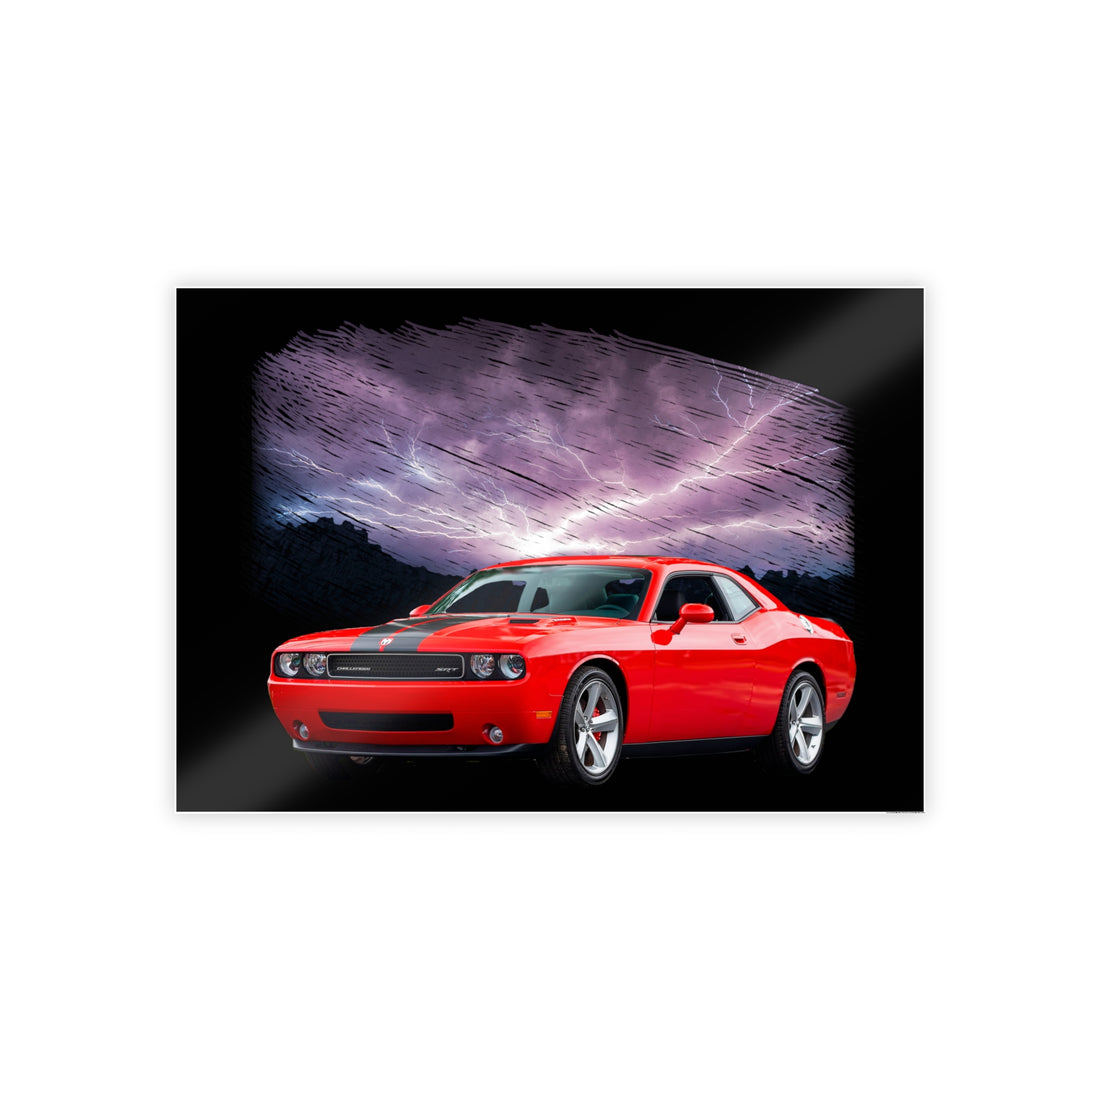 2010 Dodge Challenger Gloss Posters